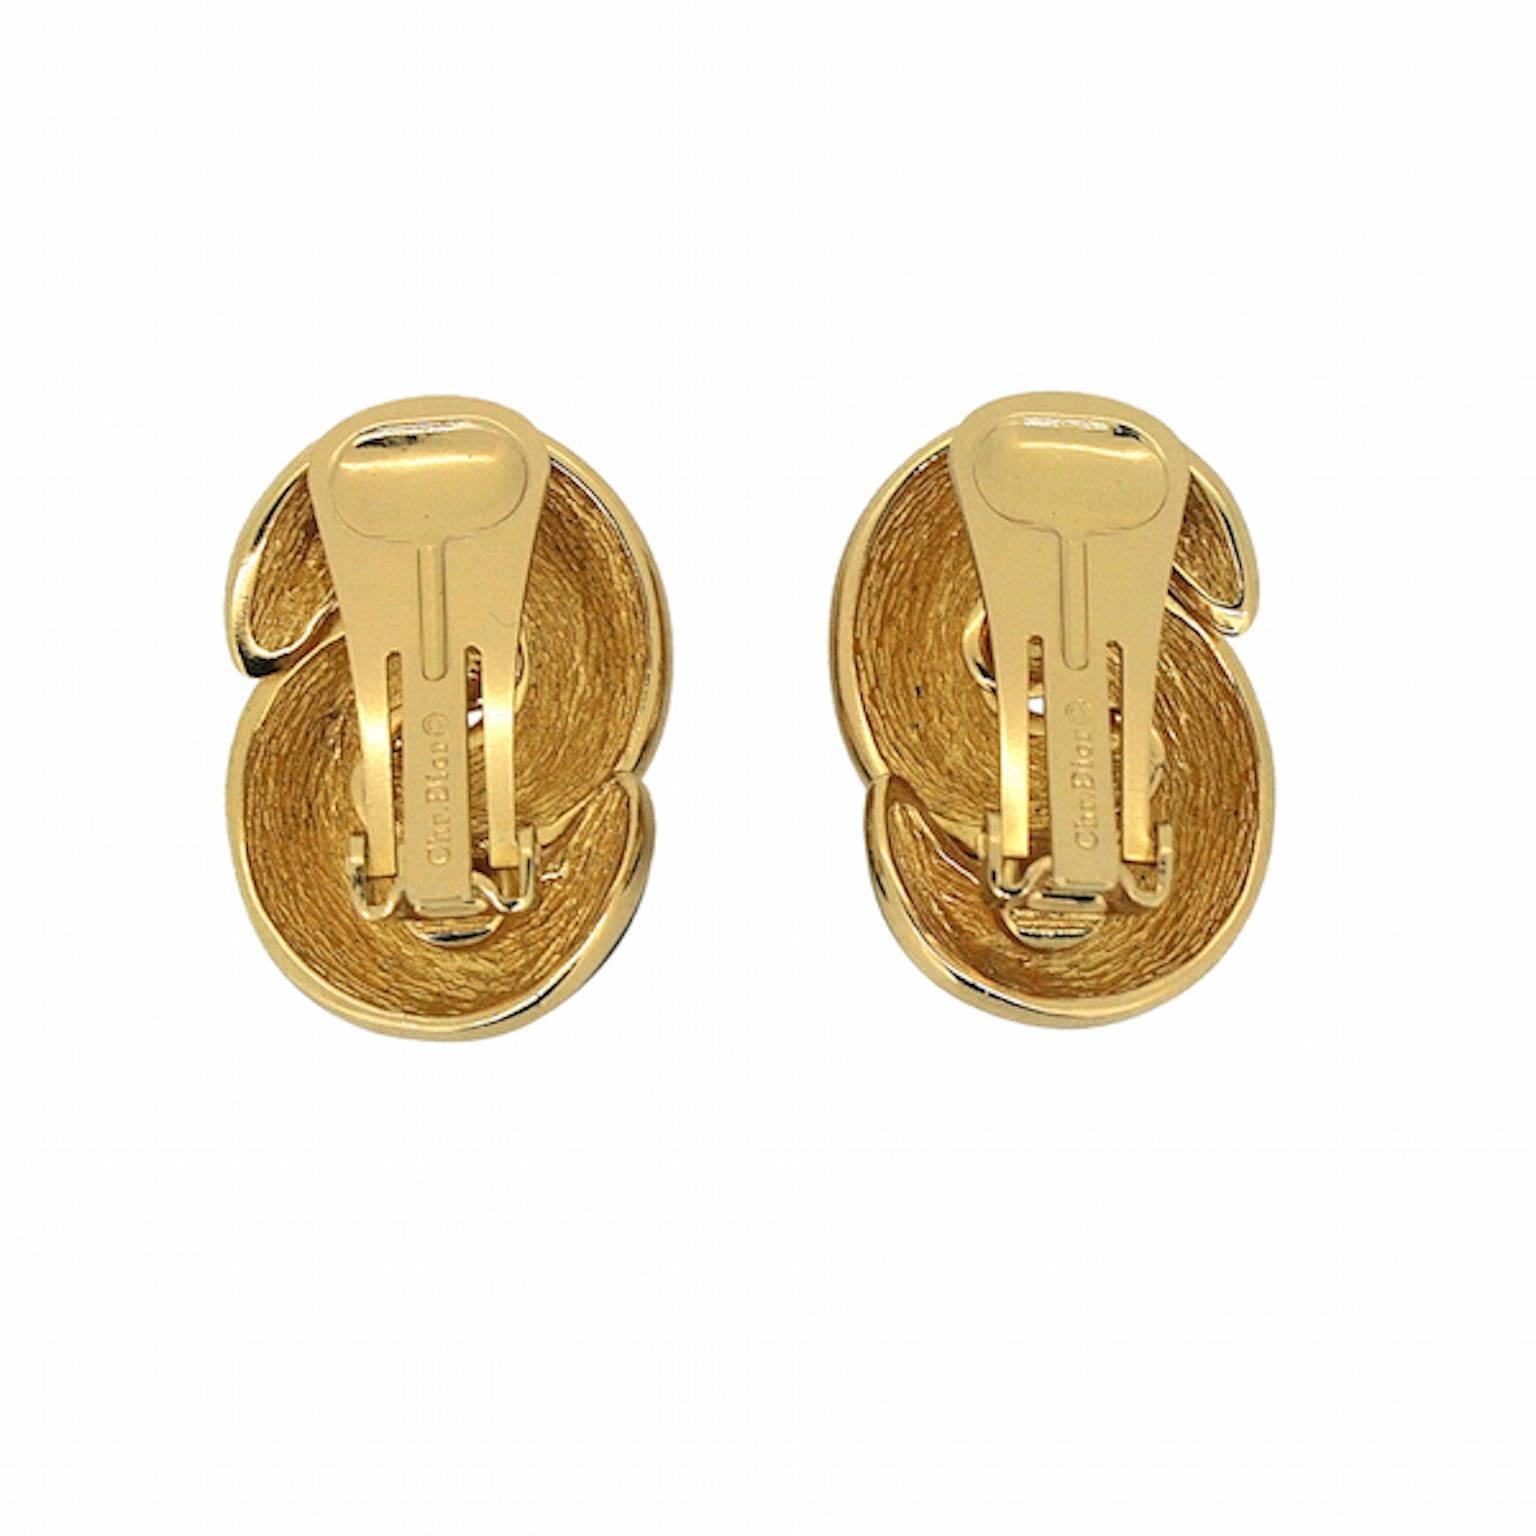 In impeccable condition, these earrings are a pristine collectors piece that can be worn and enjoyed. They are by Christian Dior and are clip on.
Condition Report:
Excellent
The Details...
These large, gold plated earrings feature a knot shape, with